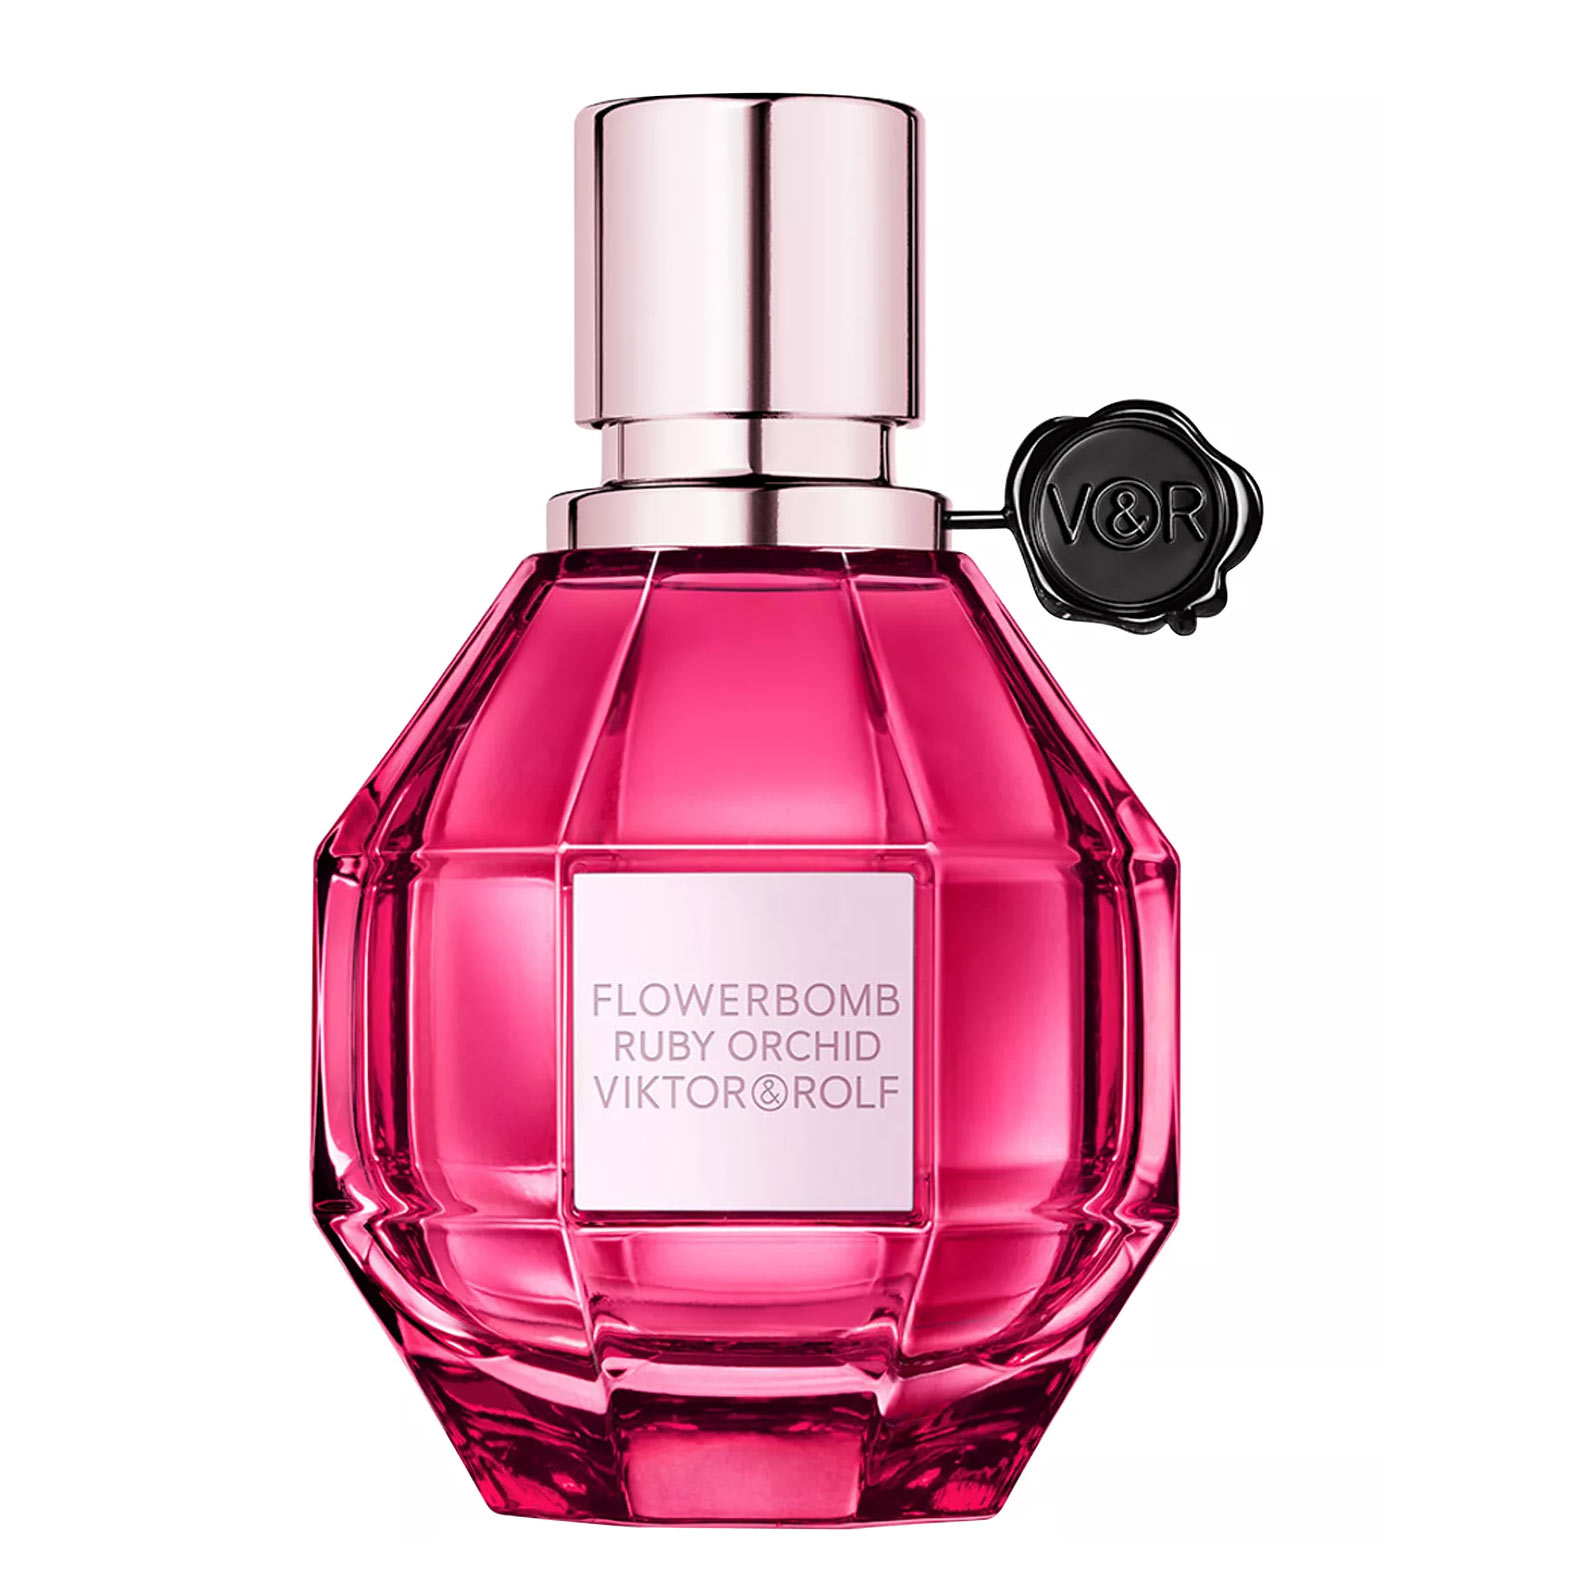 Flowerbomb Ruby Orchid Viktor & Rolf Image